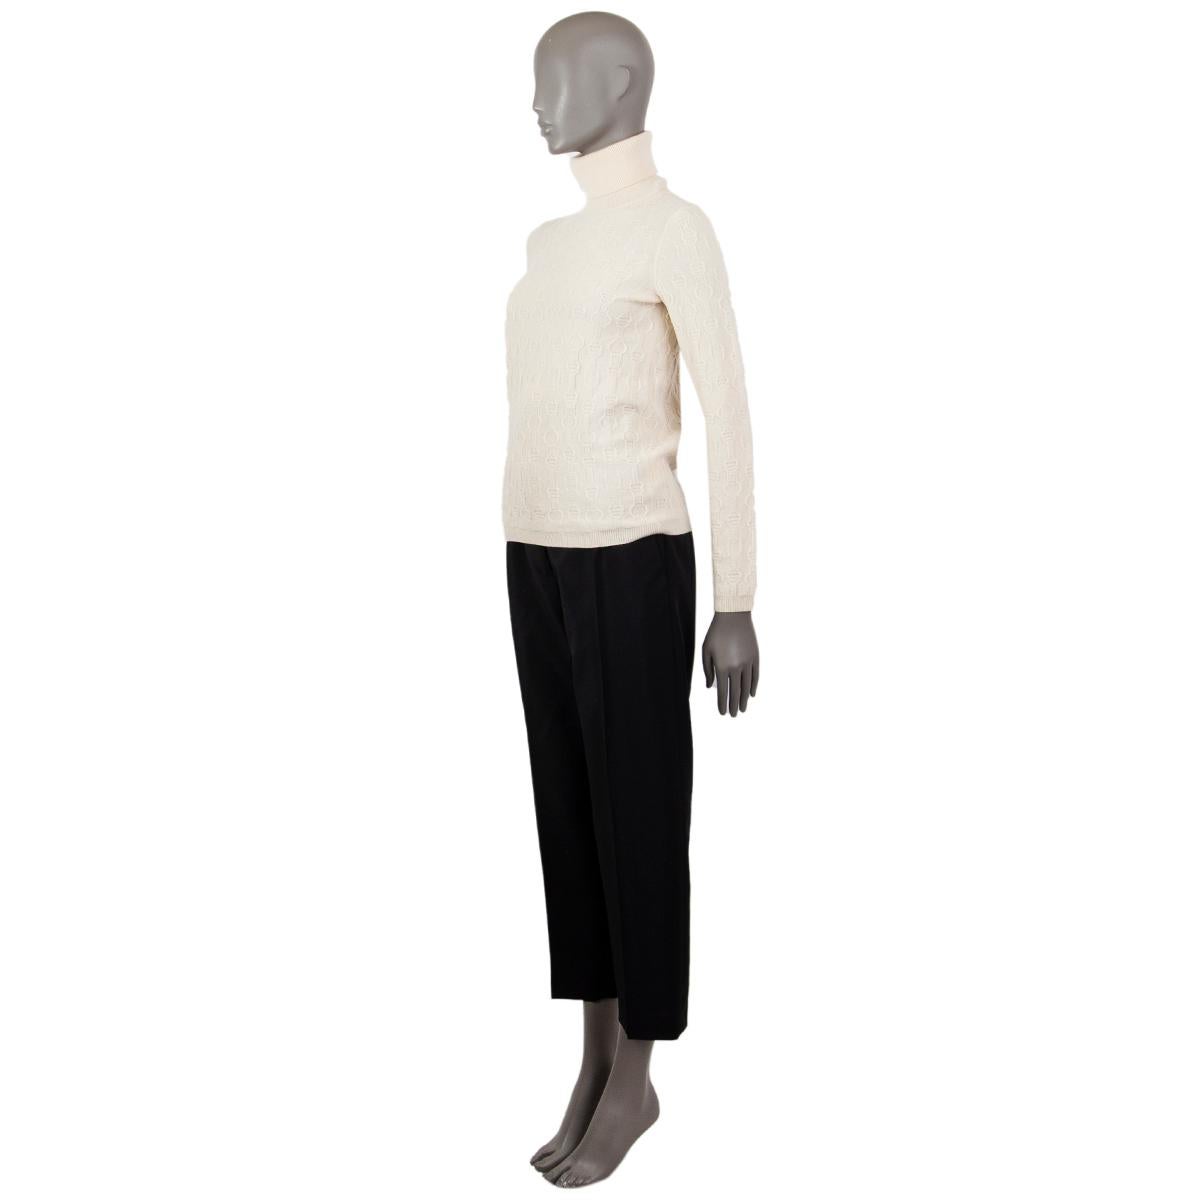 Hermès light knit turtleneck in cream cashmere (100%) with a strap-pattern, straight fit, ribbed cuff and hem. Unlined. Has been worn and is in excellent condition. 

Tag Size 34
Size XXS
Shoulder Width 35cm (13.7in)
Bust From 82cm (32in)
Waist From